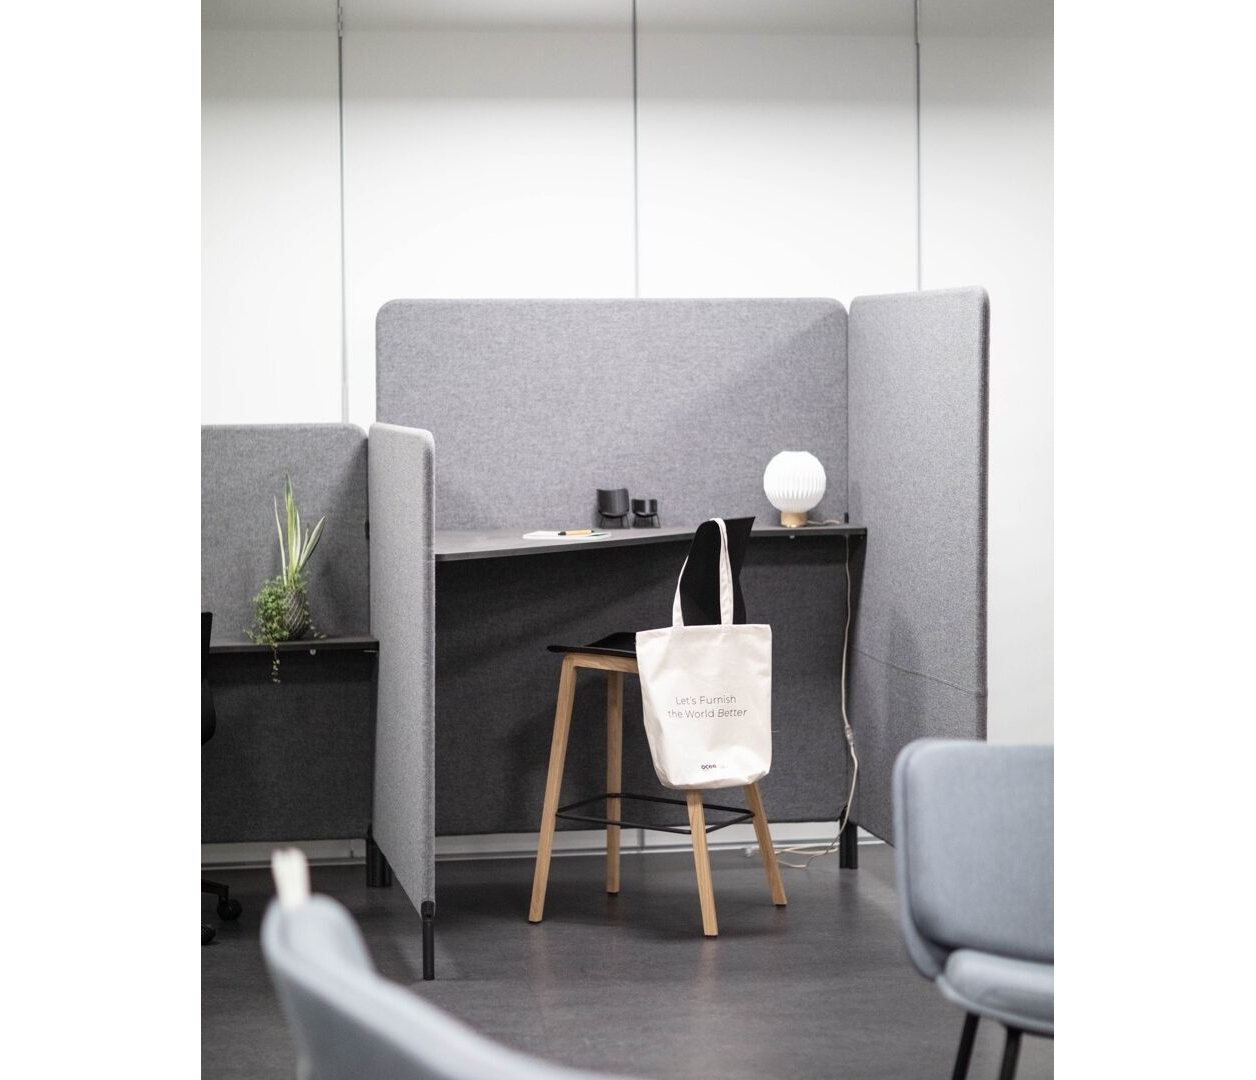 OCEE&FOUR – Work & Study Booths – FourPeople Study Booth – Lifestyle Image 1 Large